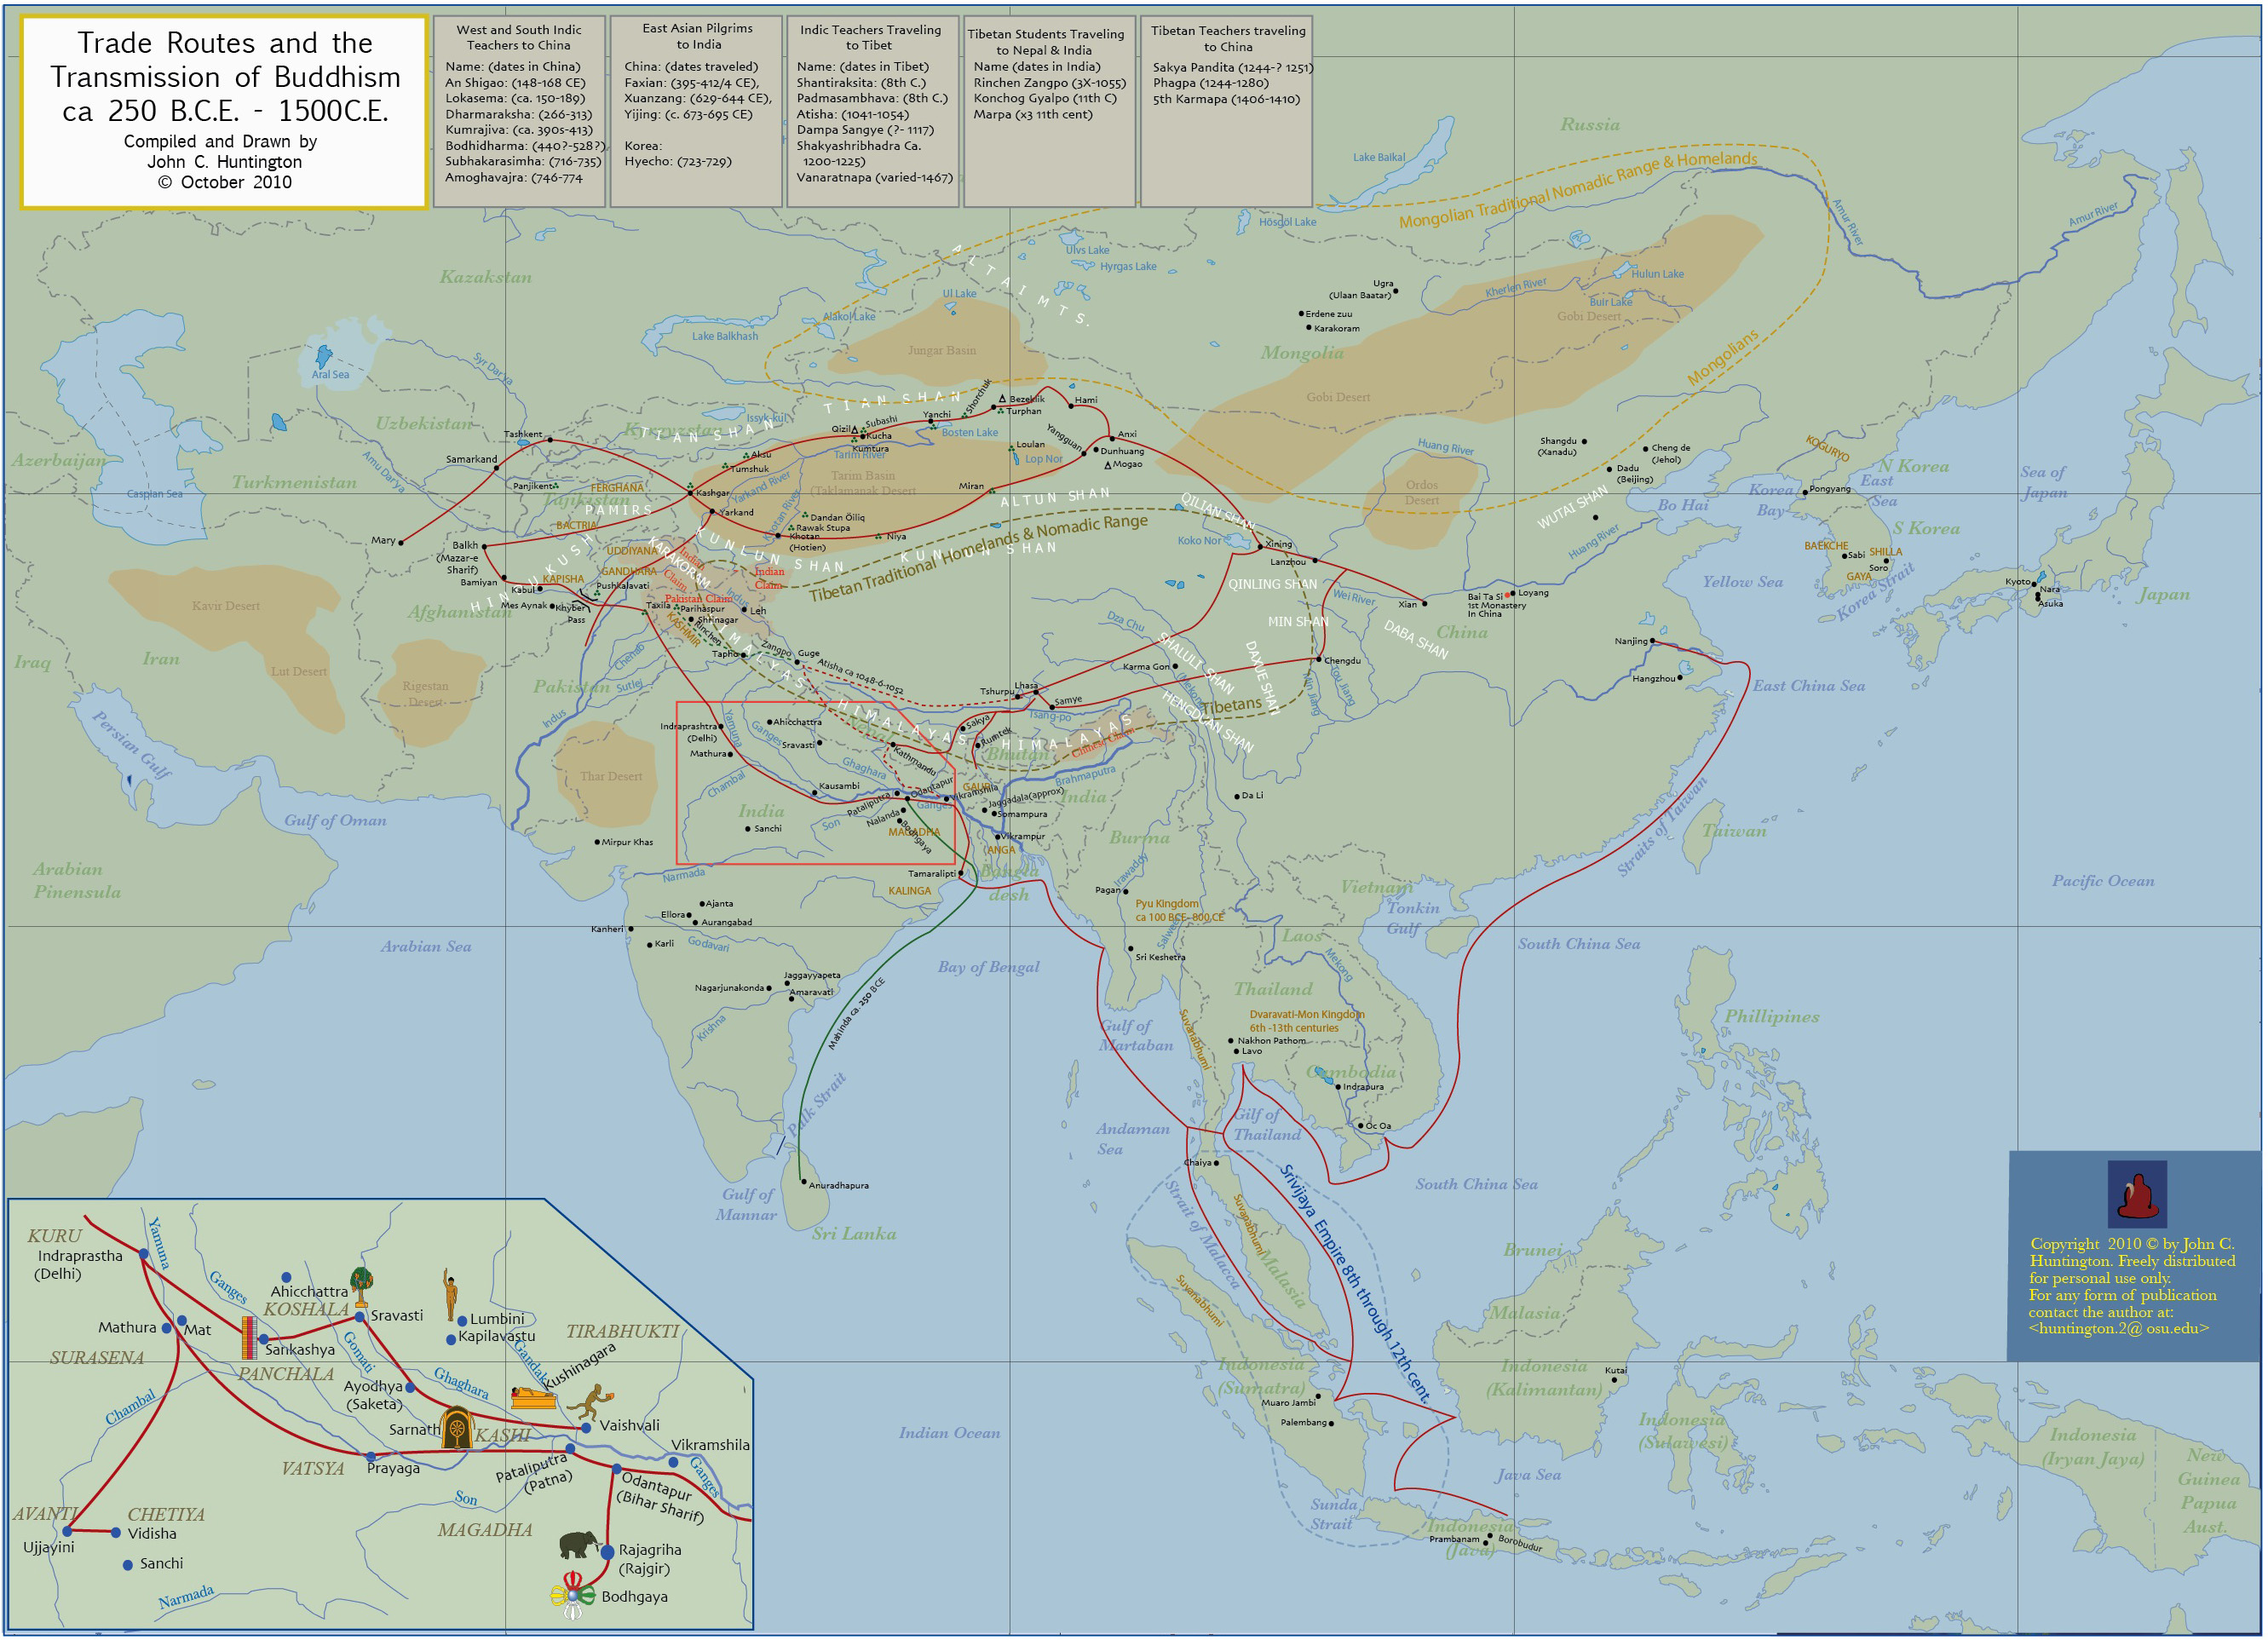 Detailed Maps of Asia by John C. Huntington